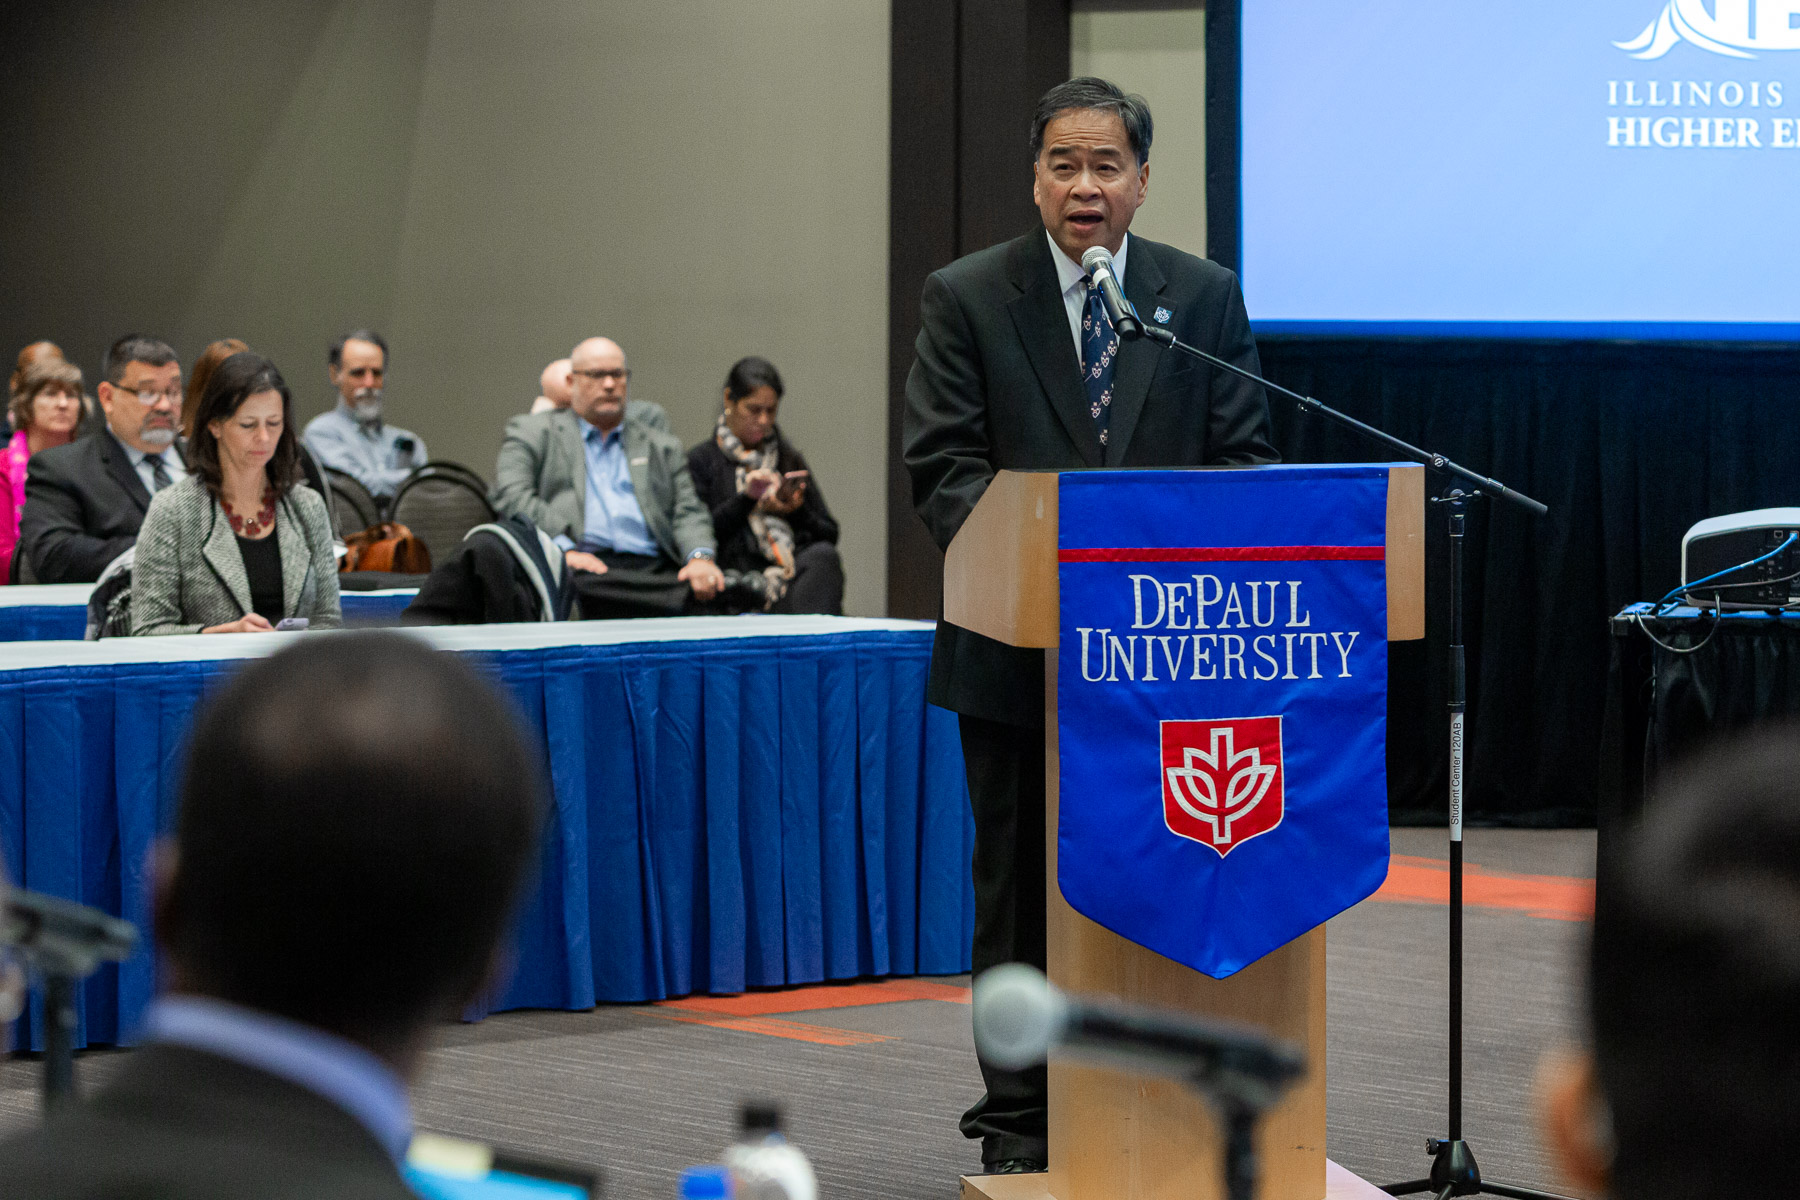 Dr. Esteban speaks about some of DePaul’s strategic objectives to members of the Illinois Board of Higher Education. (DePaul University/Randall Spriggs)